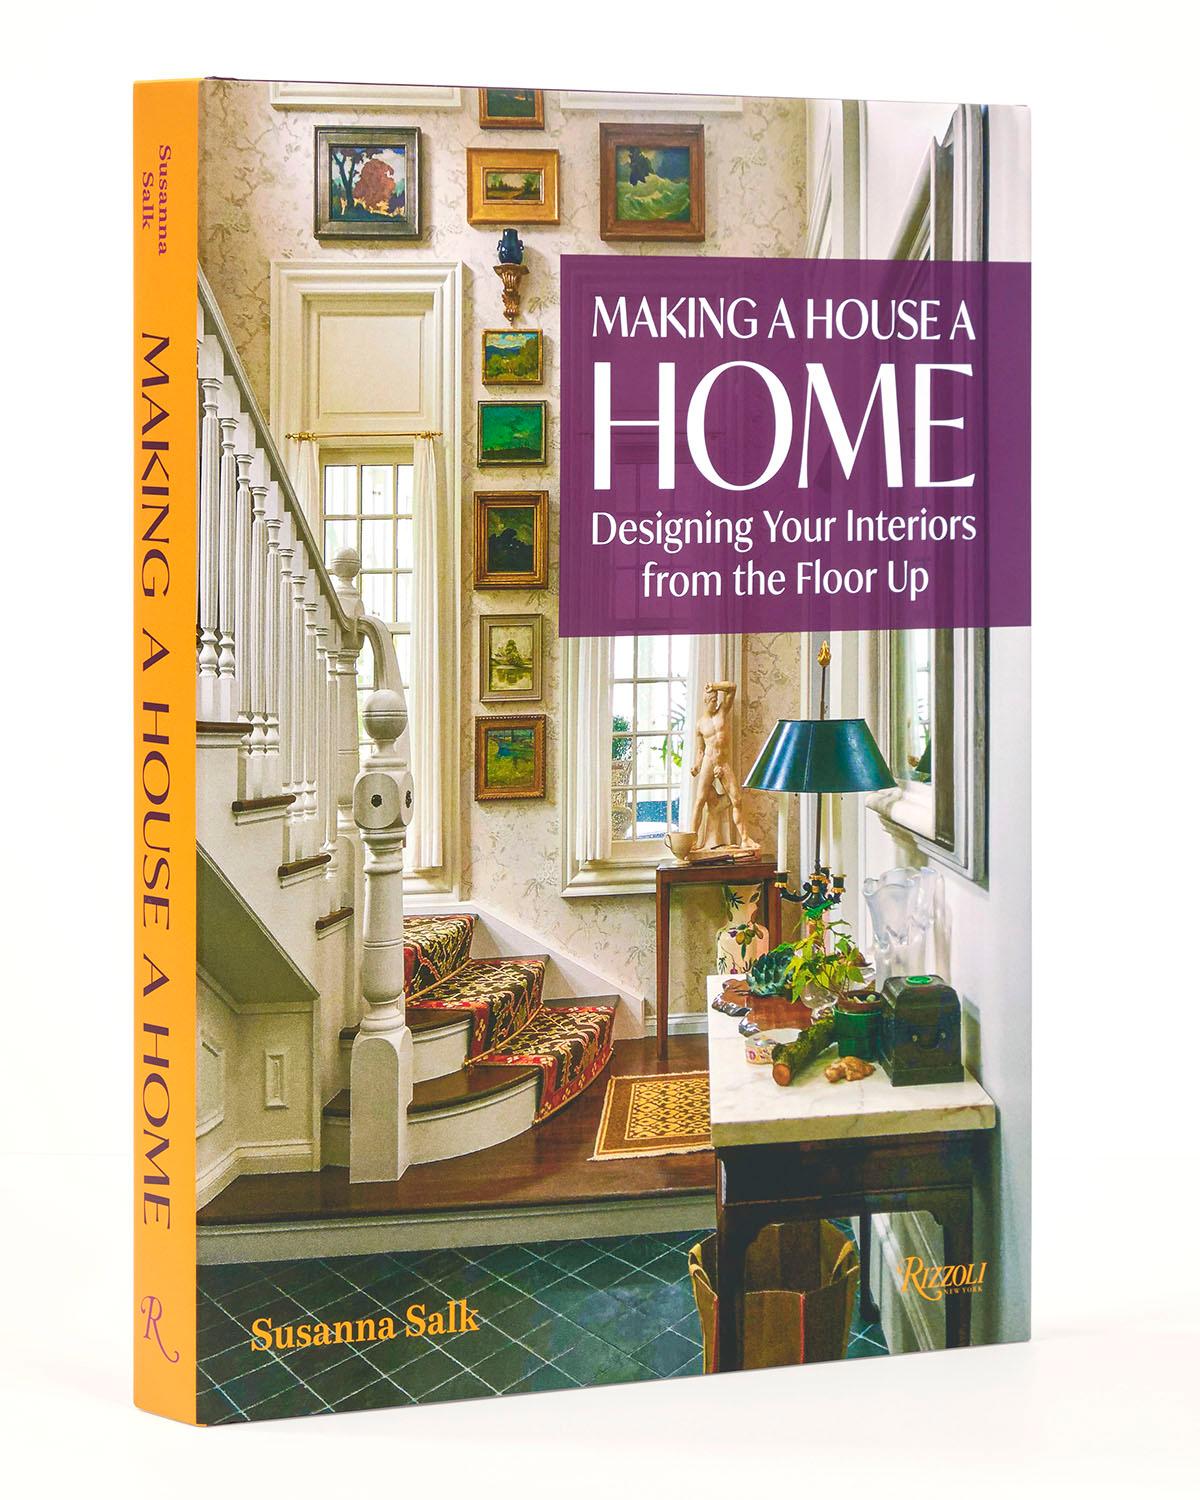 Making a House a Home: Designing Your Interiors from the Floor Up
Author Susanna Salk

Susanna Salk’s latest book is a passionate primer on how to transform an empty space, whether it’s an apartment or a house, into a home. Full of beautiful